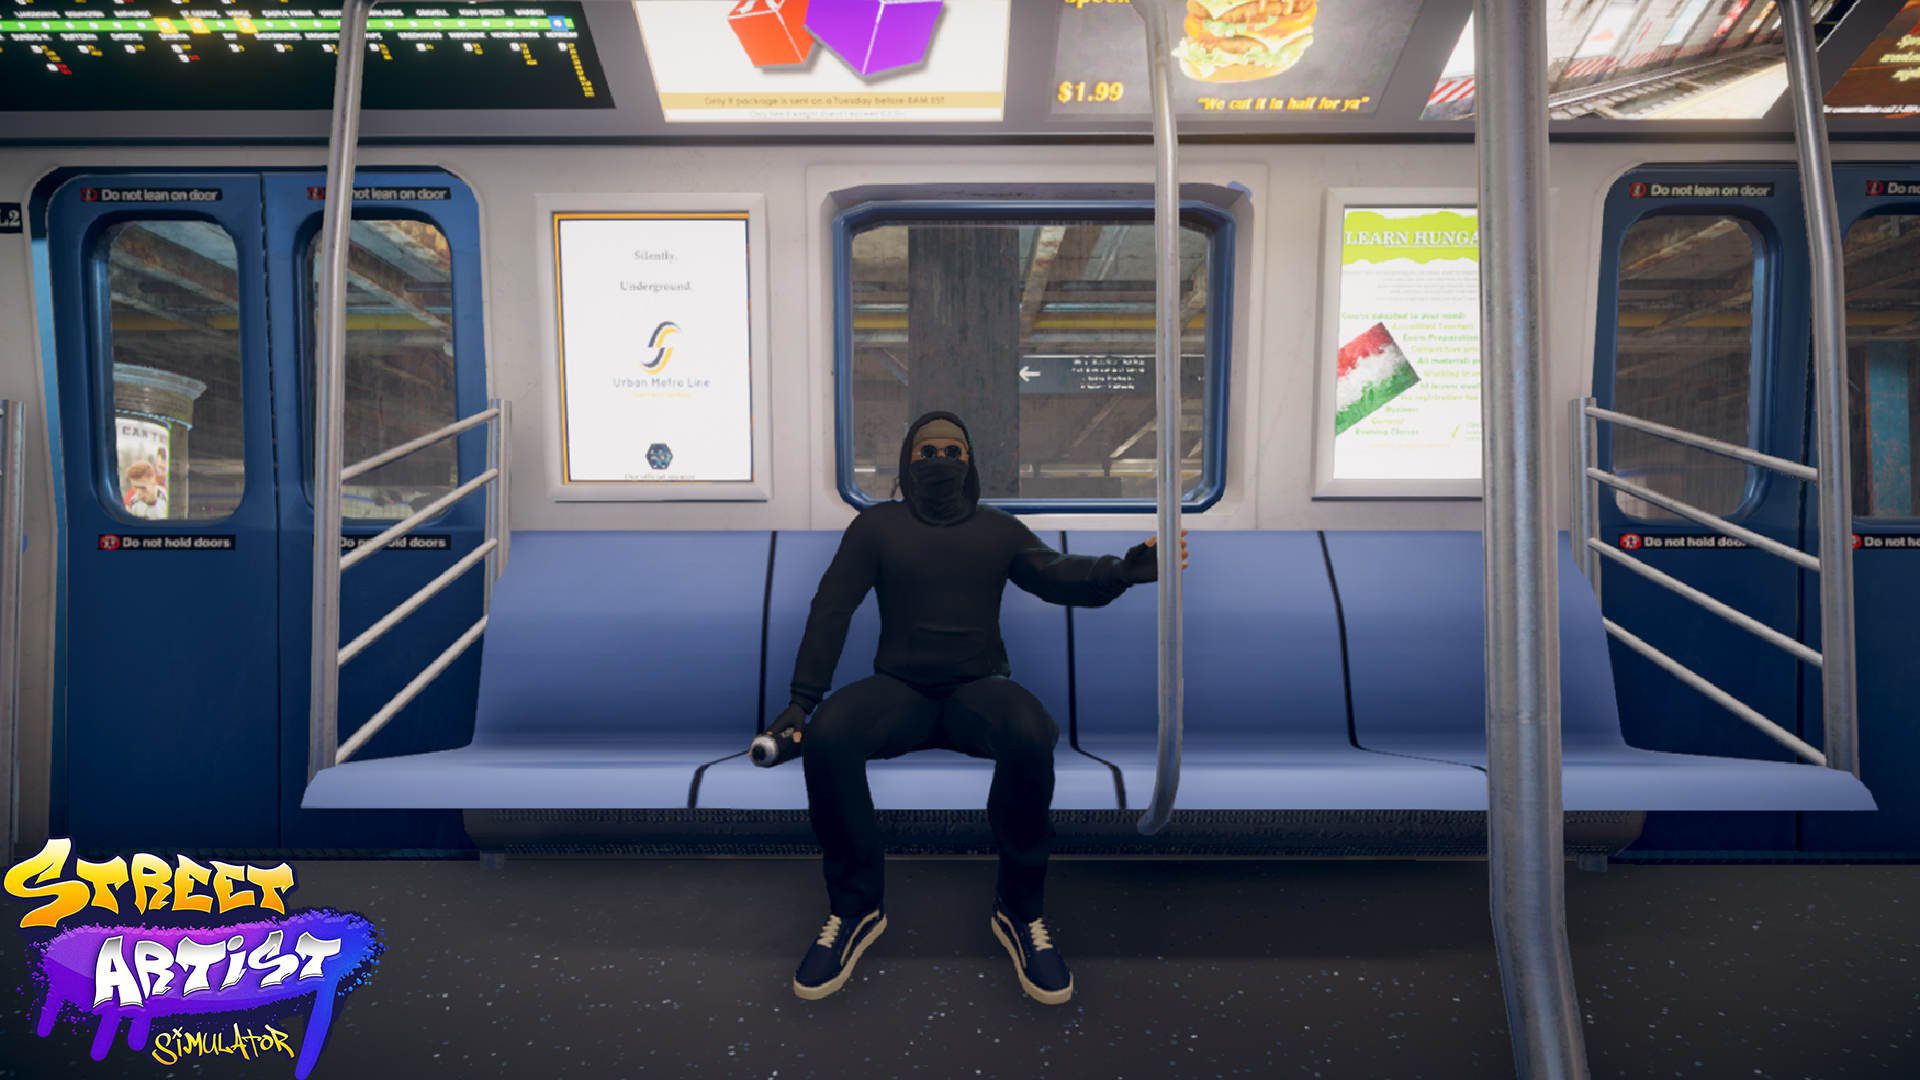 Street Artist Simulator coming to PC and consoles